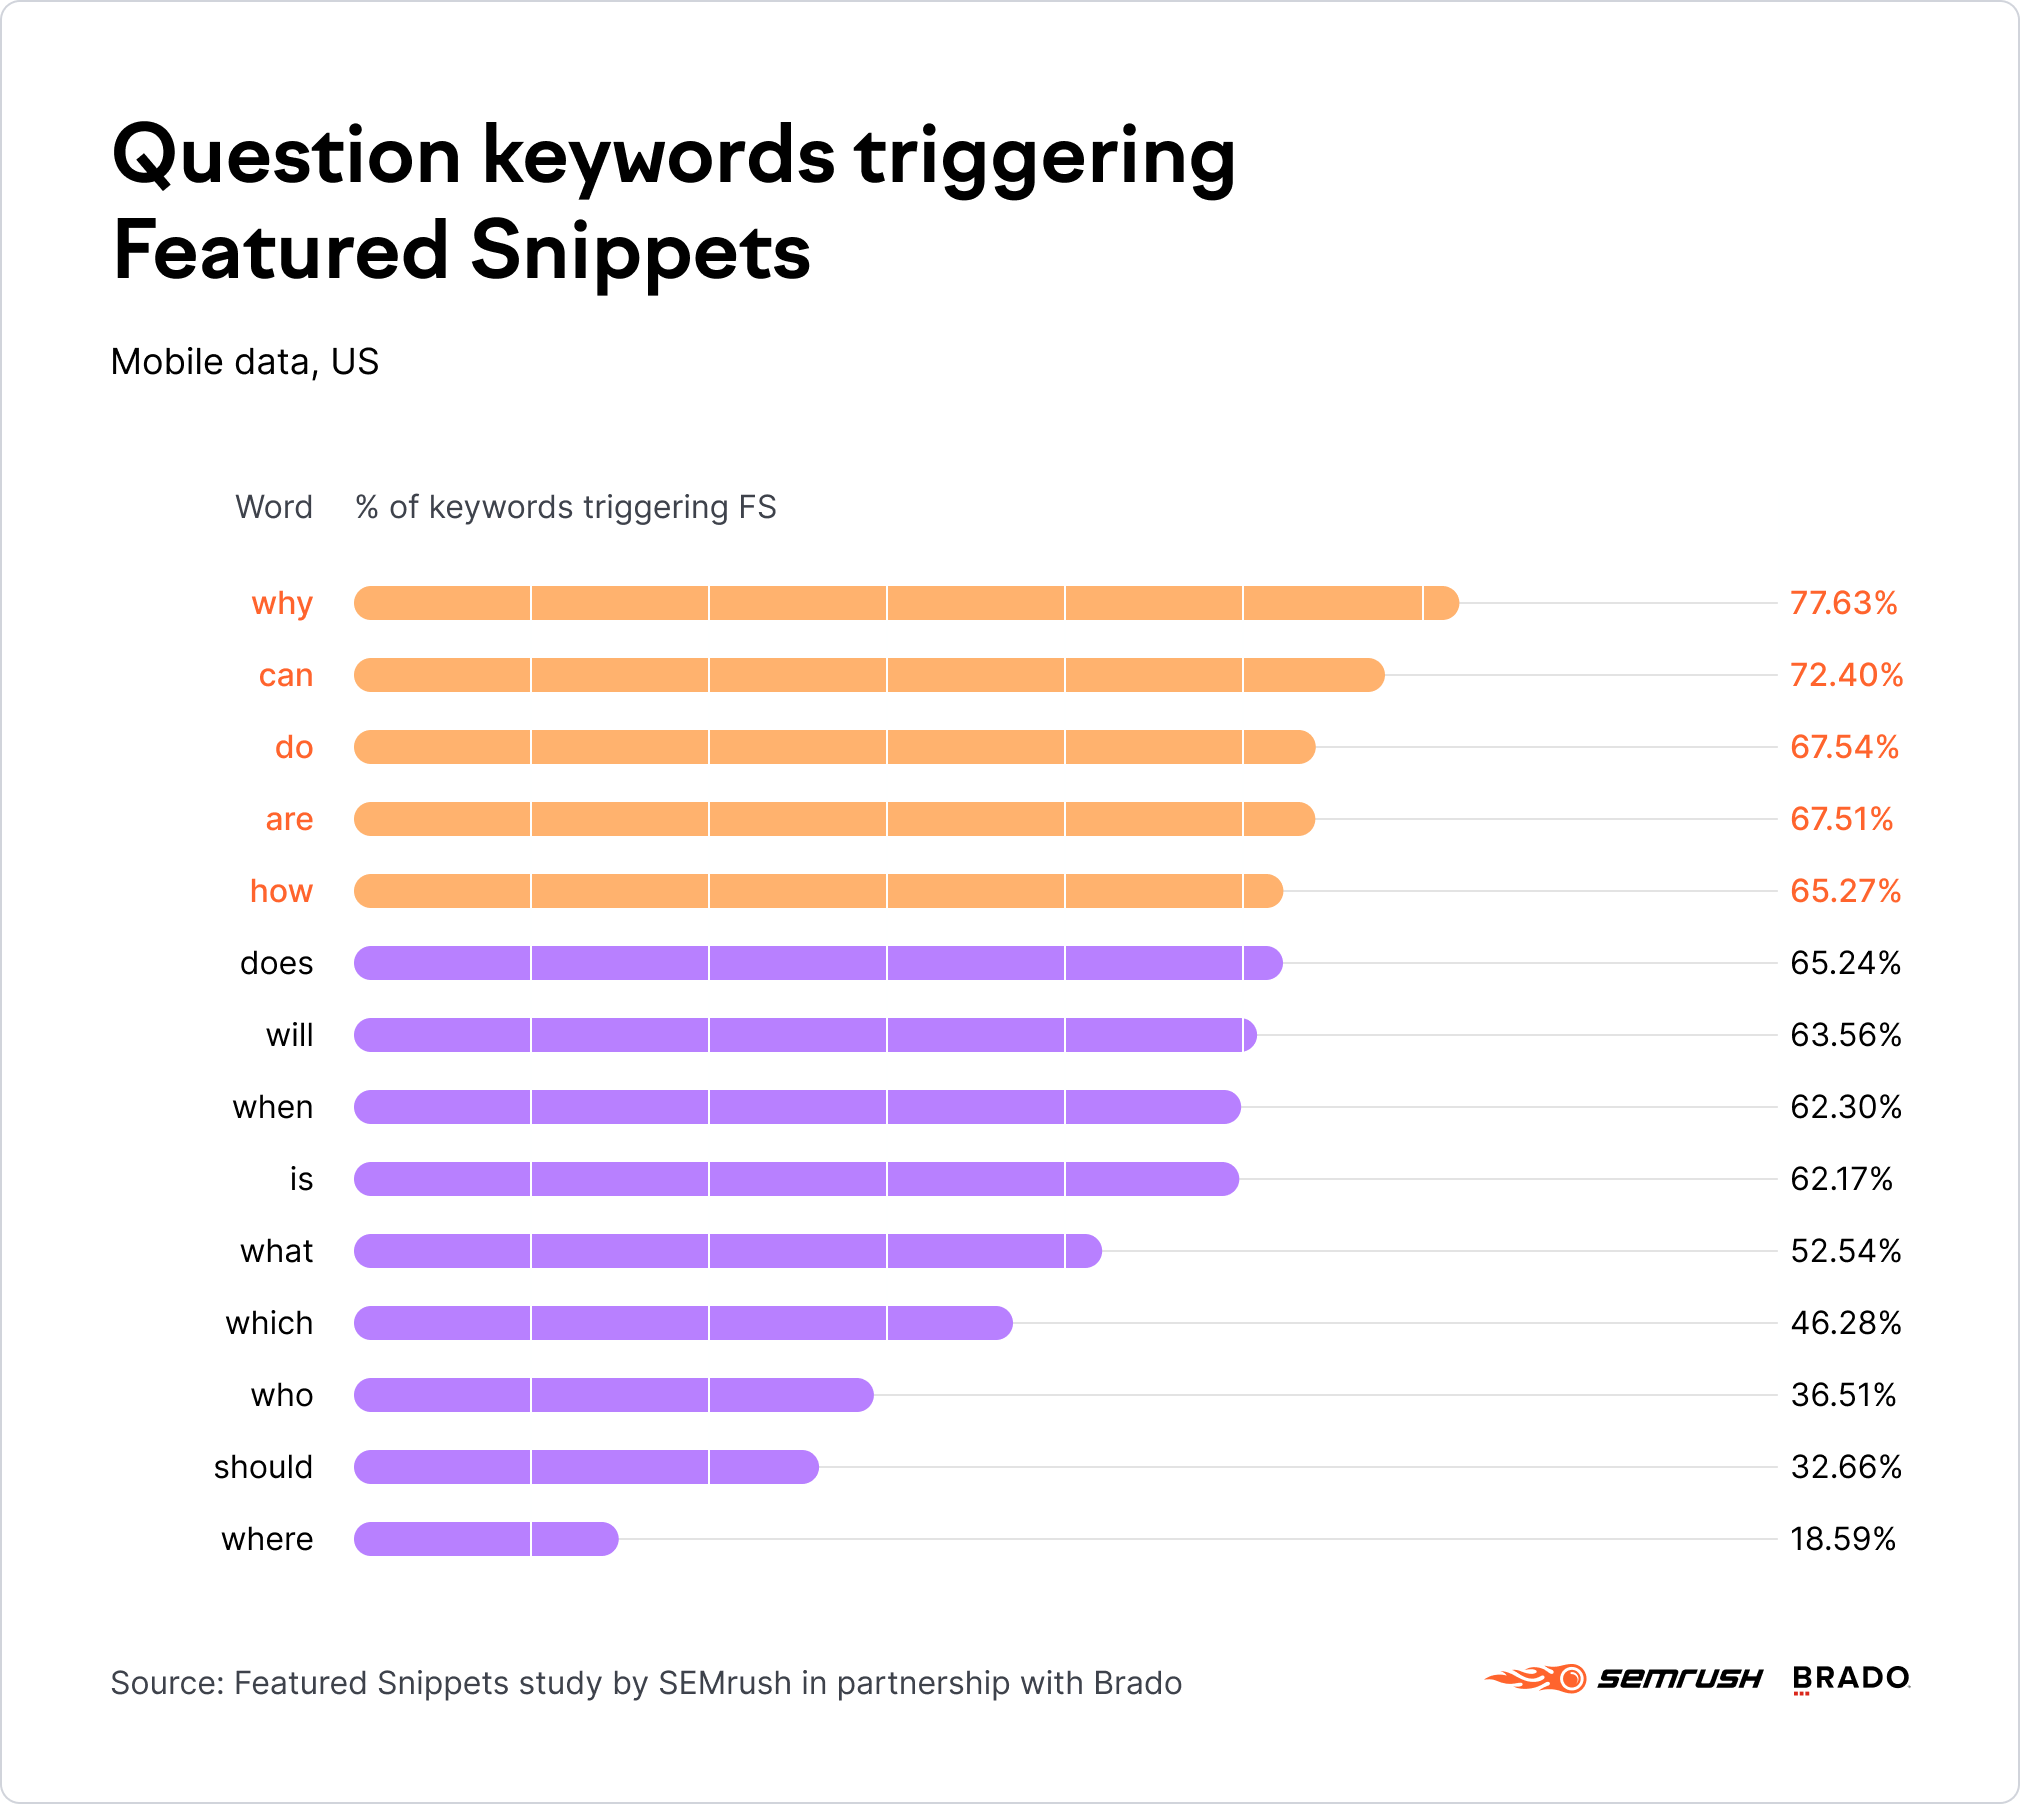 Question keywords triggering featured snippets